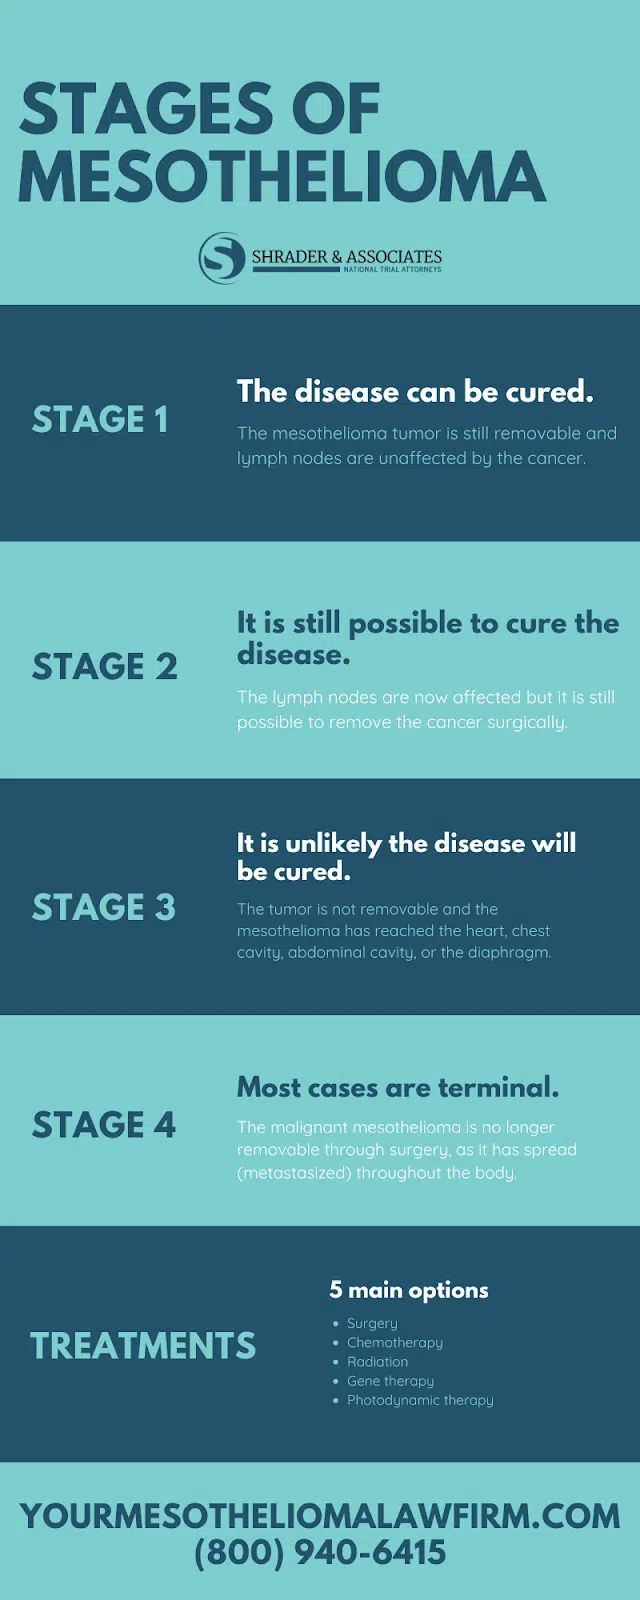 Stages of Mesothelioma [INFOGRAPHIC]